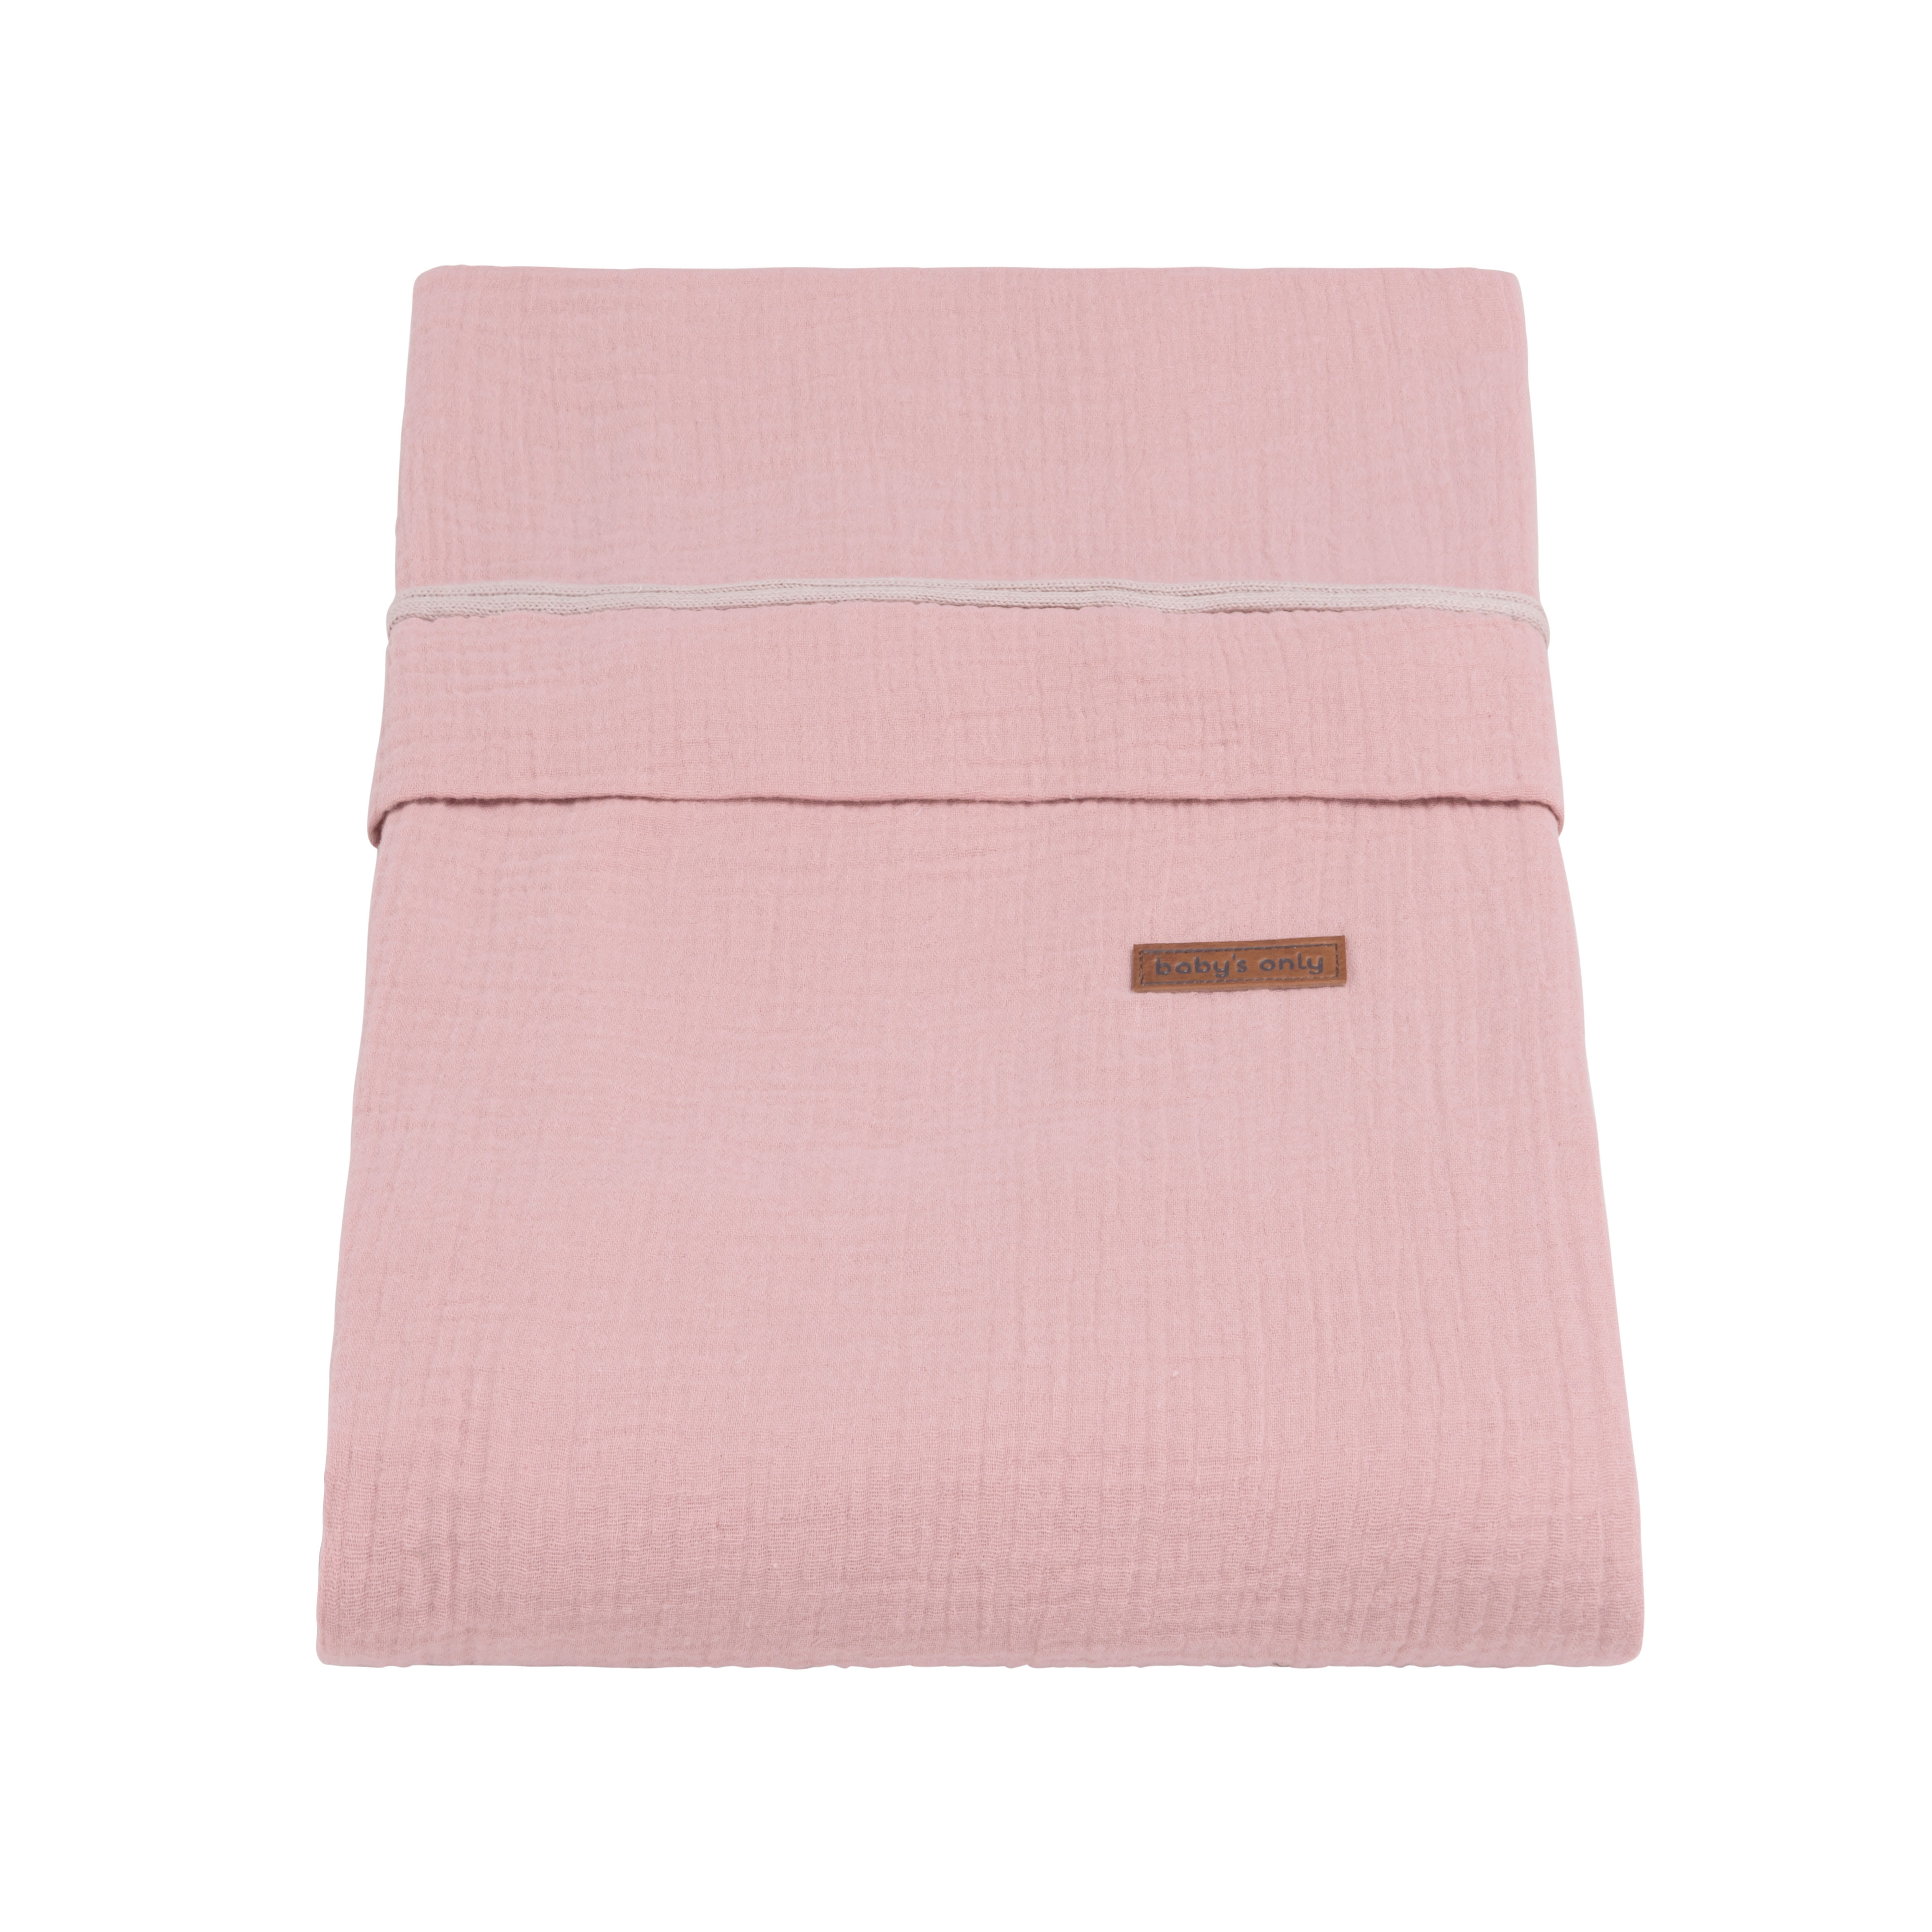 Duvet cover Breeze old pink - 100x135